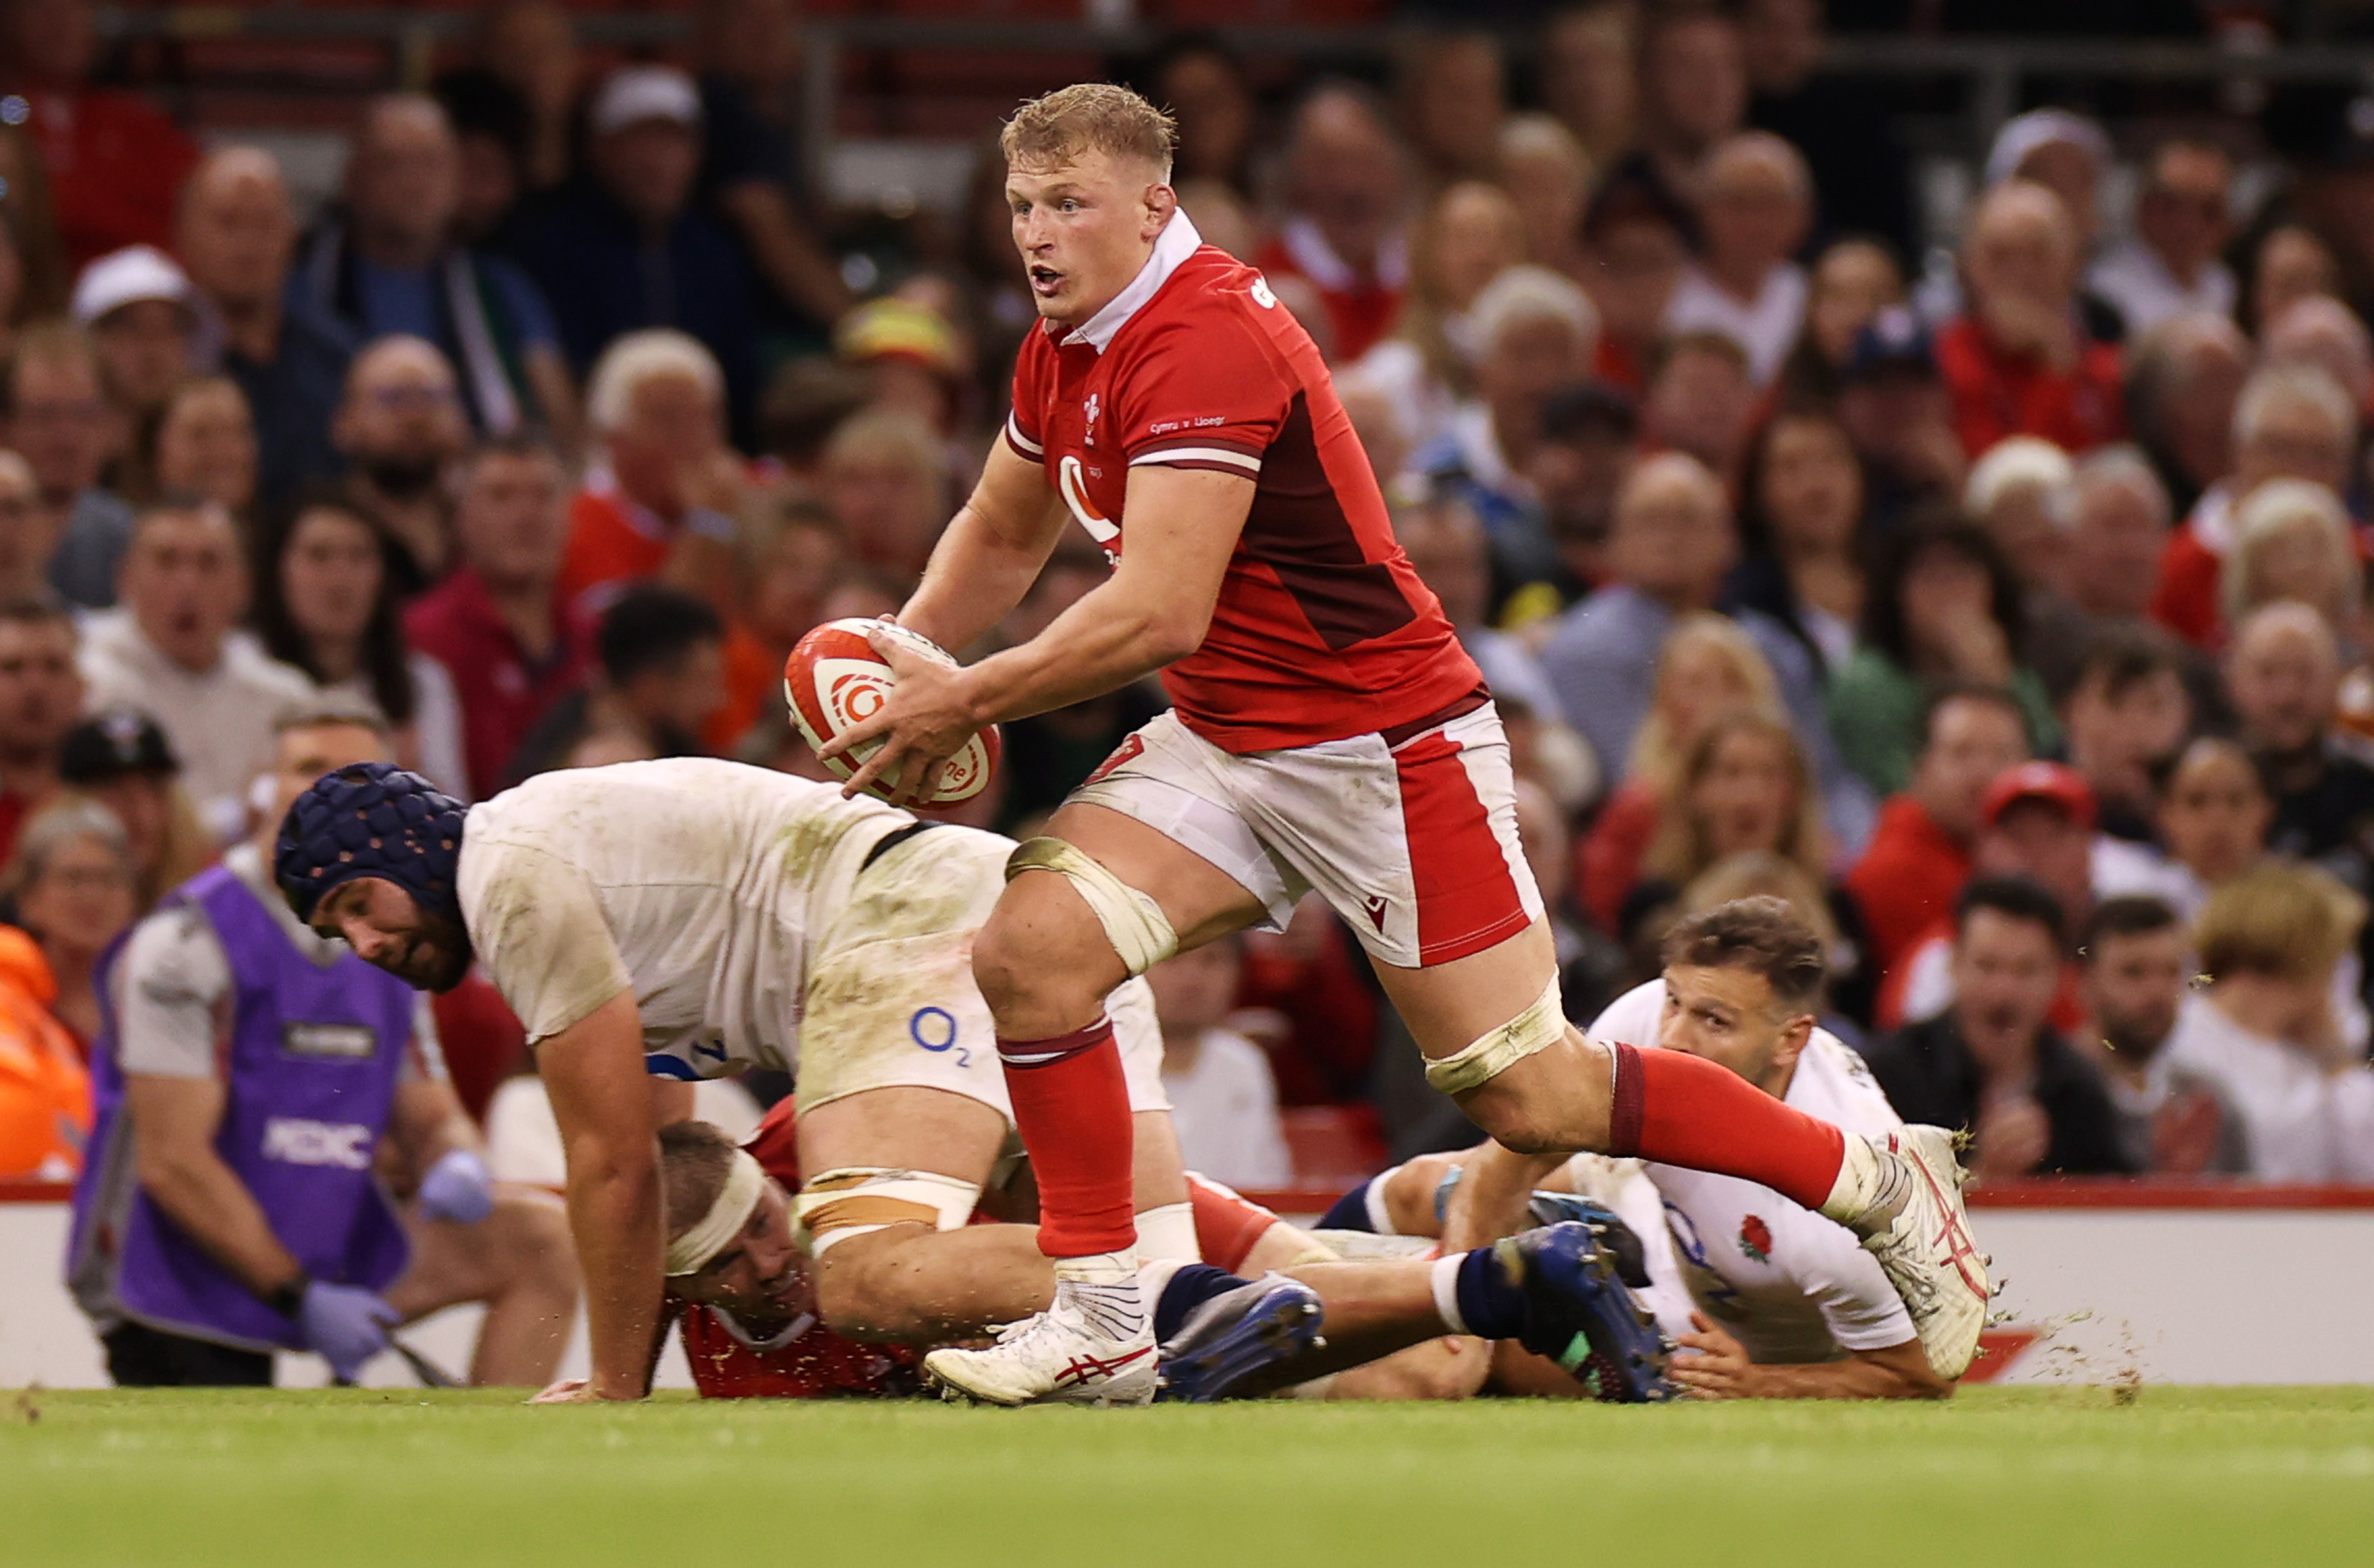 Reaction as Wales beat England 20-9 in Rugby World Cup warm-up - Live